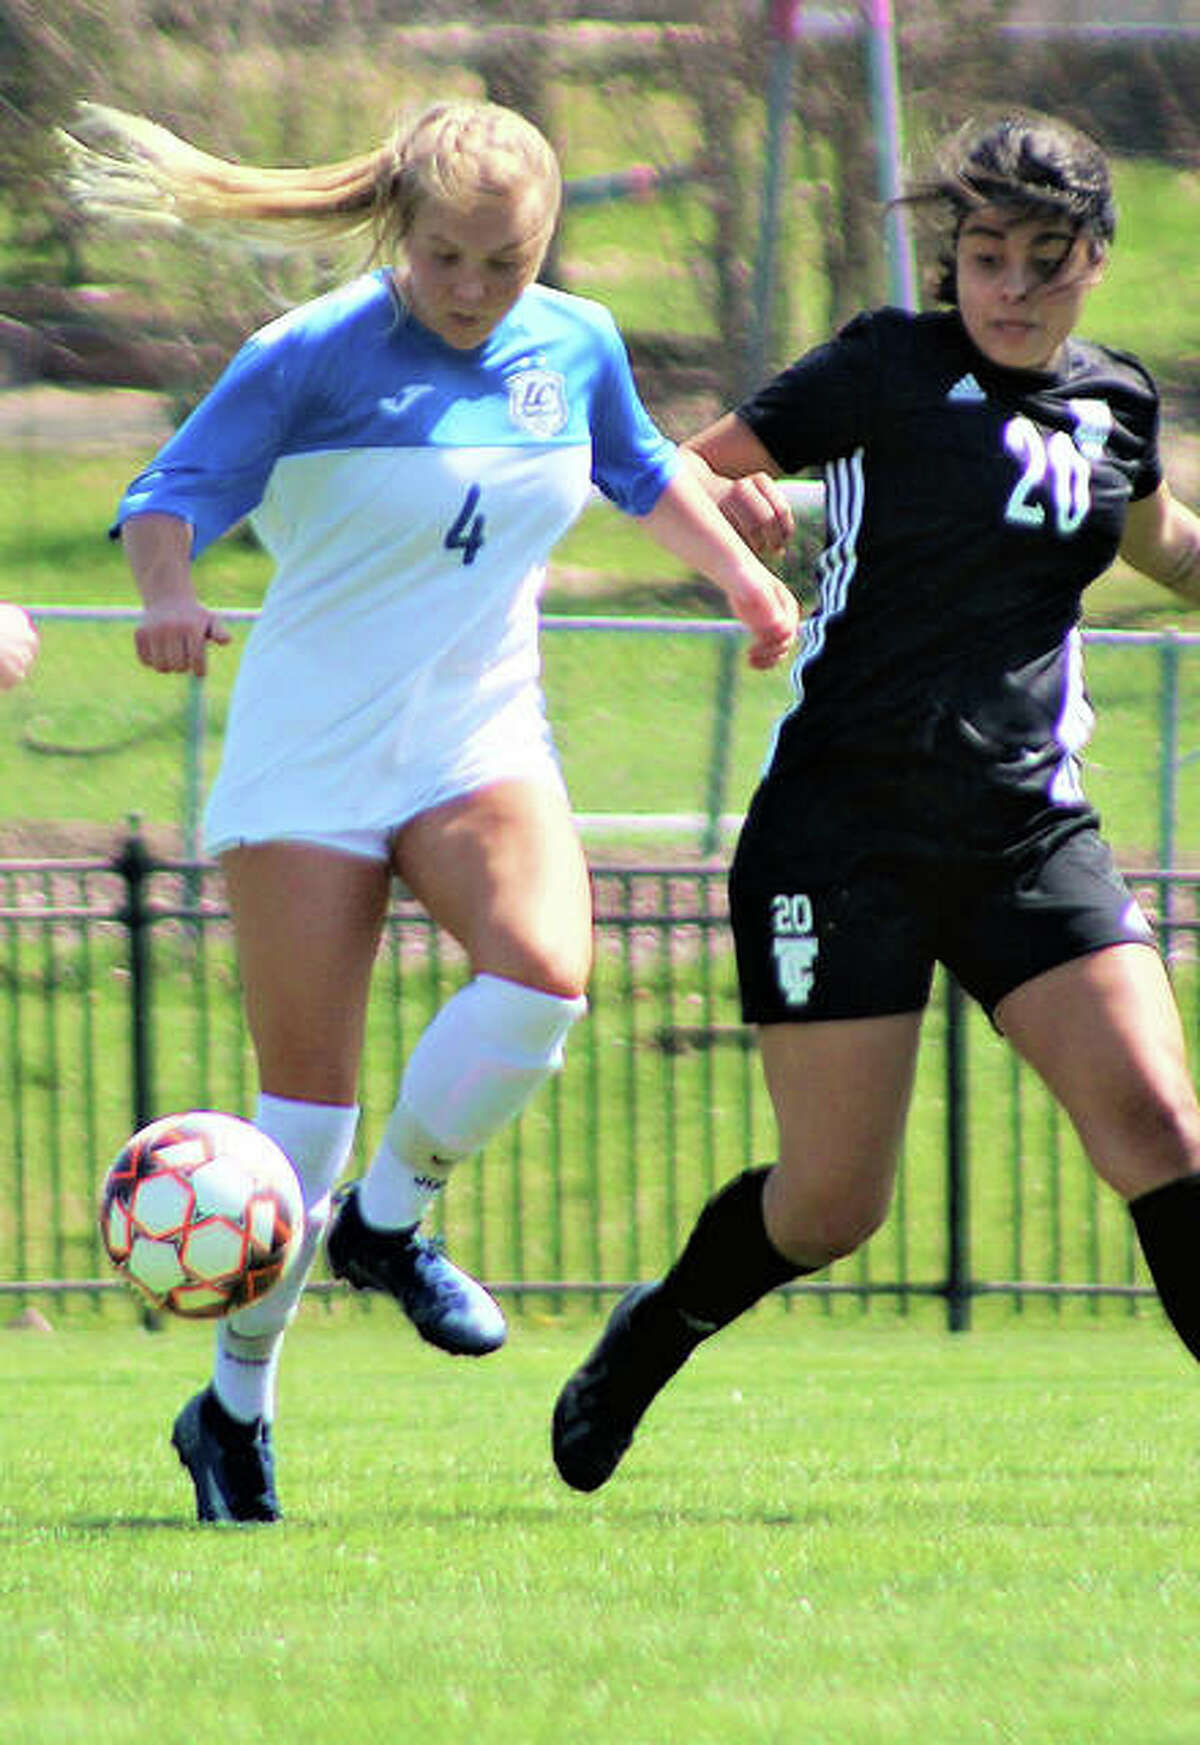 LCCC’s Skylar Hollingshead (4) scored a pair of goals to help lead the Trailblazers to a 5-0 victory over Southwest Tennessee Community College Sunday evening in Memphis. Teammate Chrissy Mitchell also scored twice and Kaya Thies added a goal.